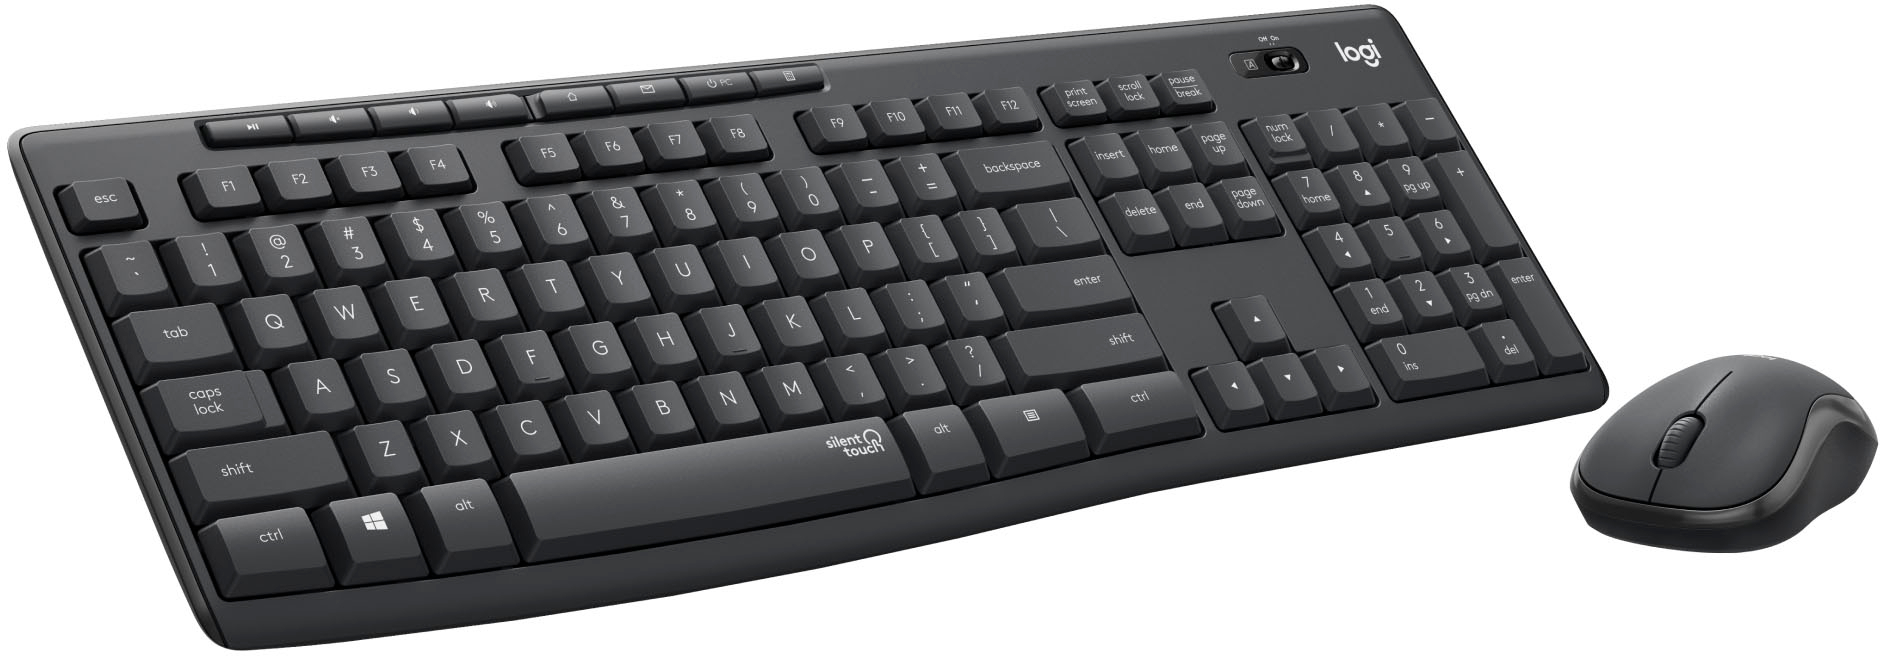 Logitech Mk295 Full Size Wireless Keyboard And Mouse Bundle For Pc And Laptop With Silent Touch Technology Graphite 9 0097 Best Buy